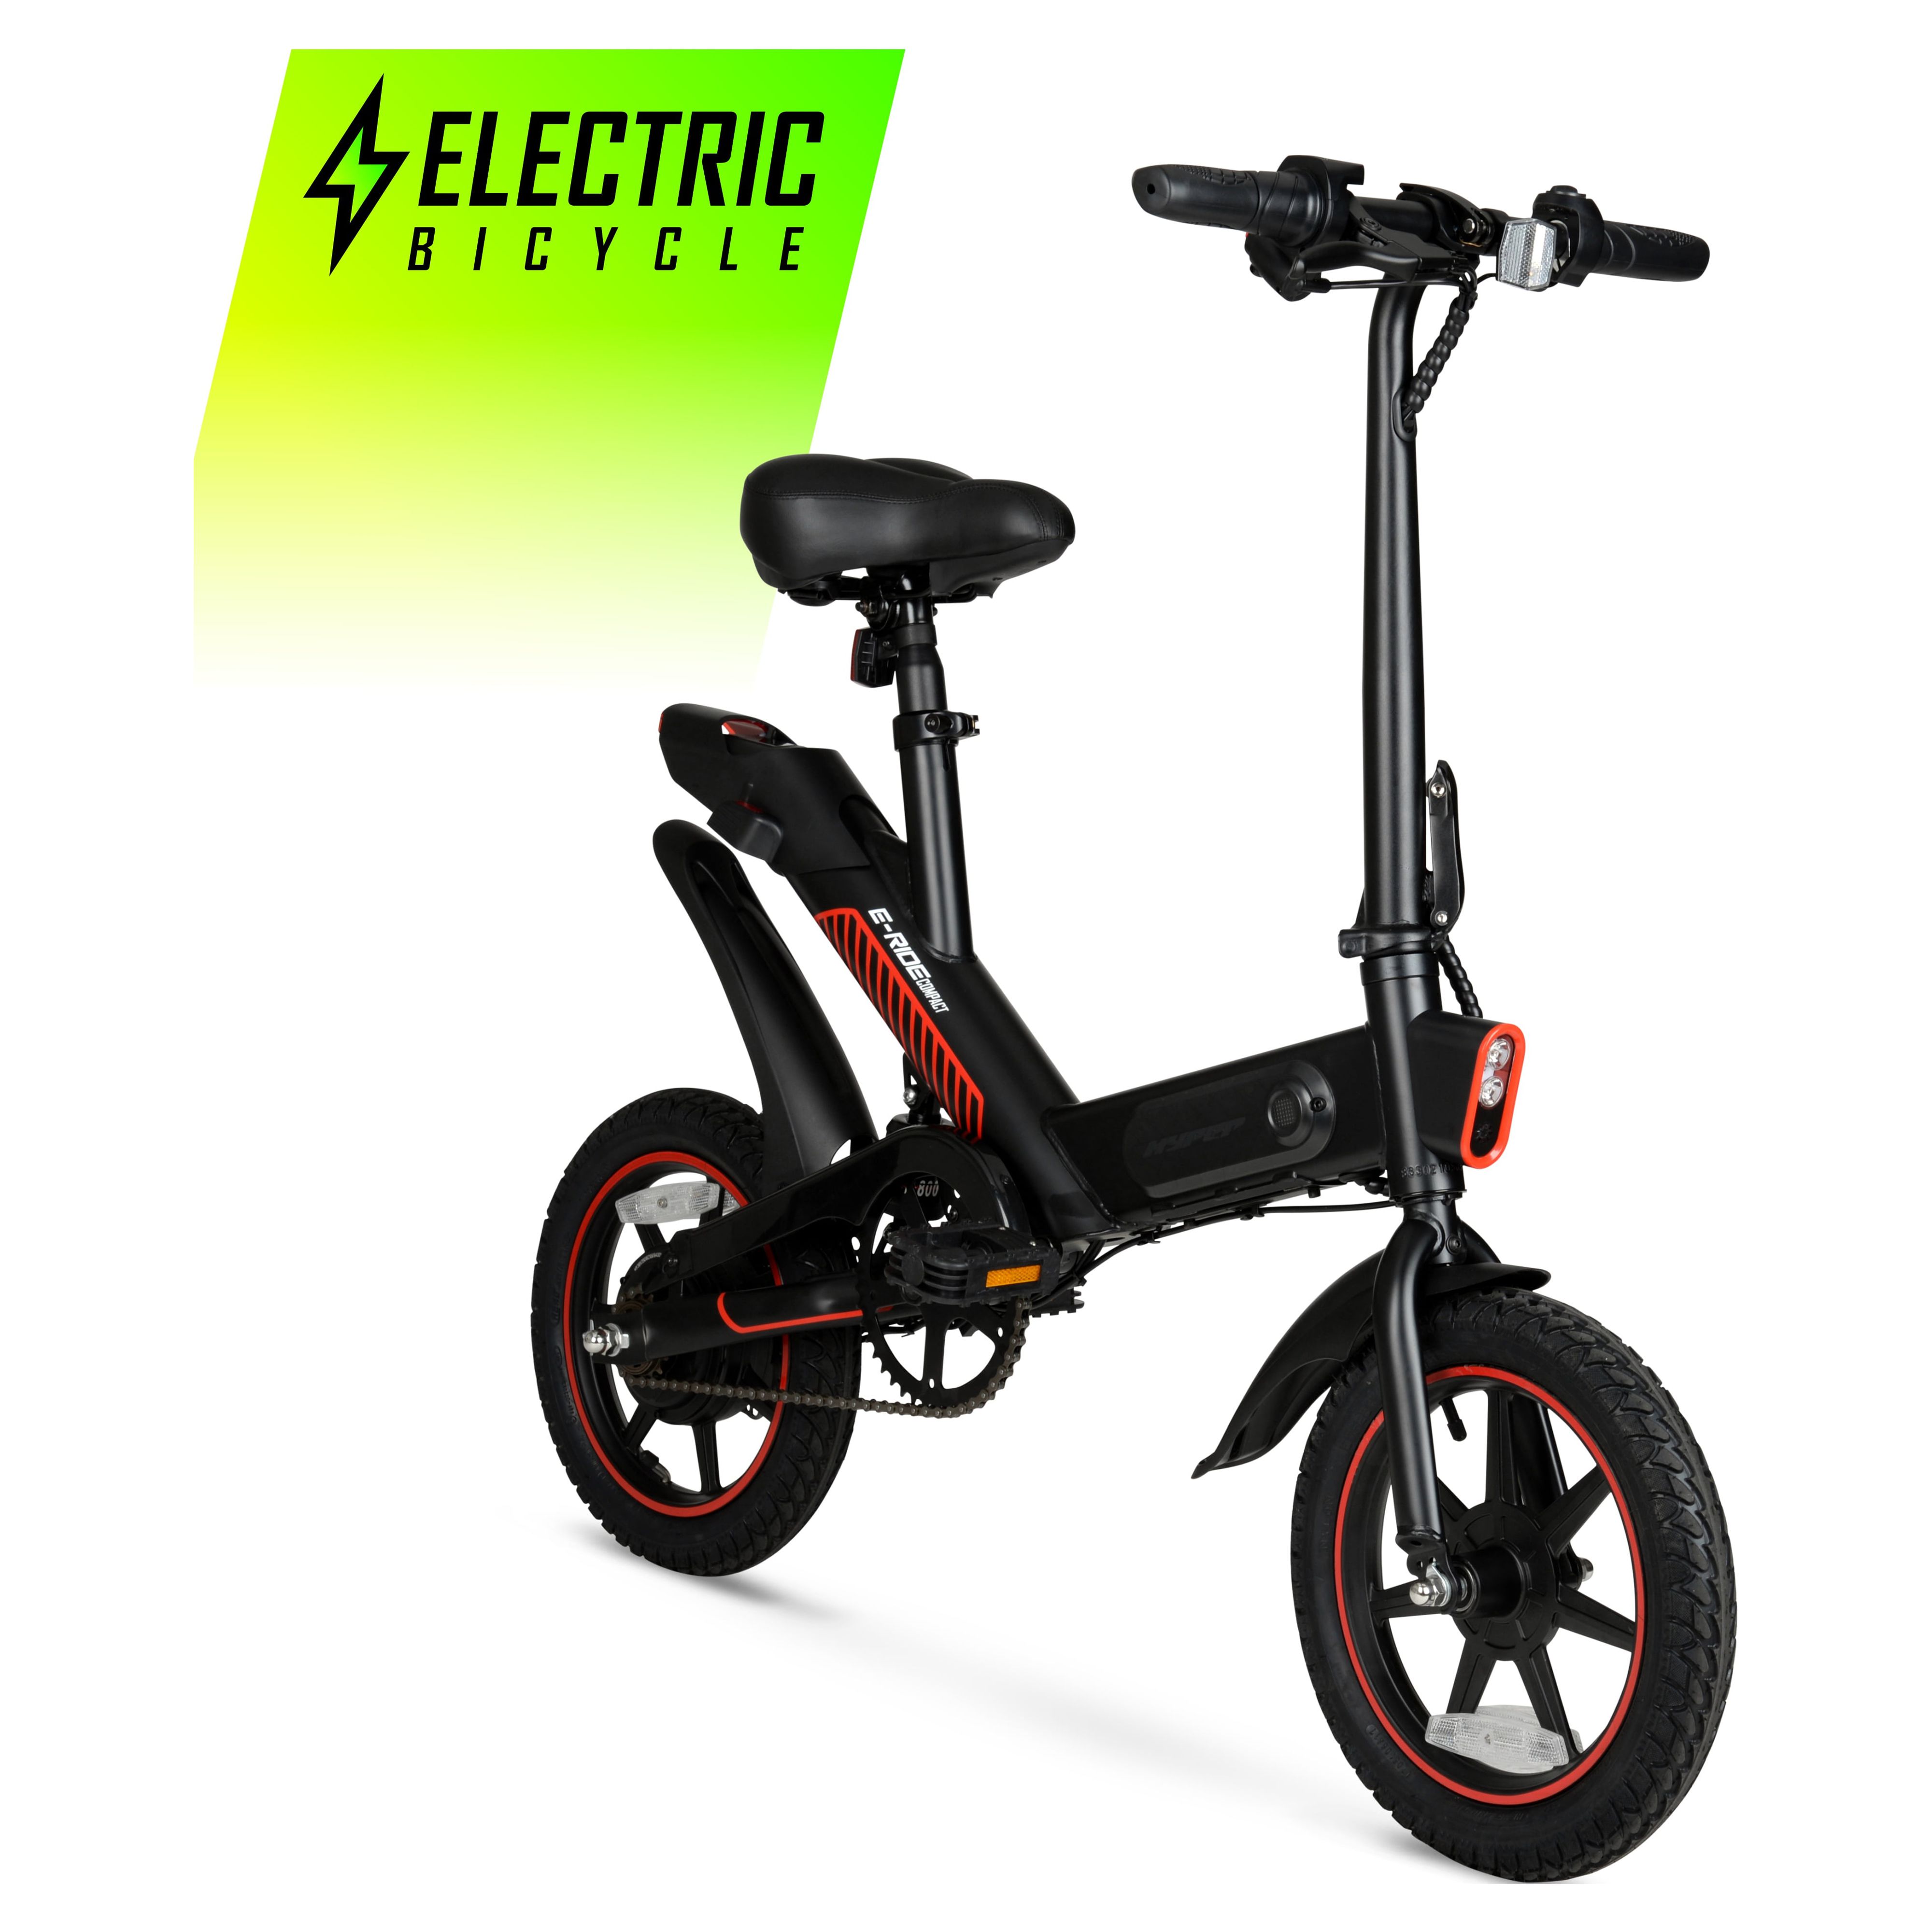 Hyper Bicycles 14" 36V Foldable Compact Electric Bike w/Throttle, 350W Motor, Recommended Ages 14 years and up - image 3 of 20